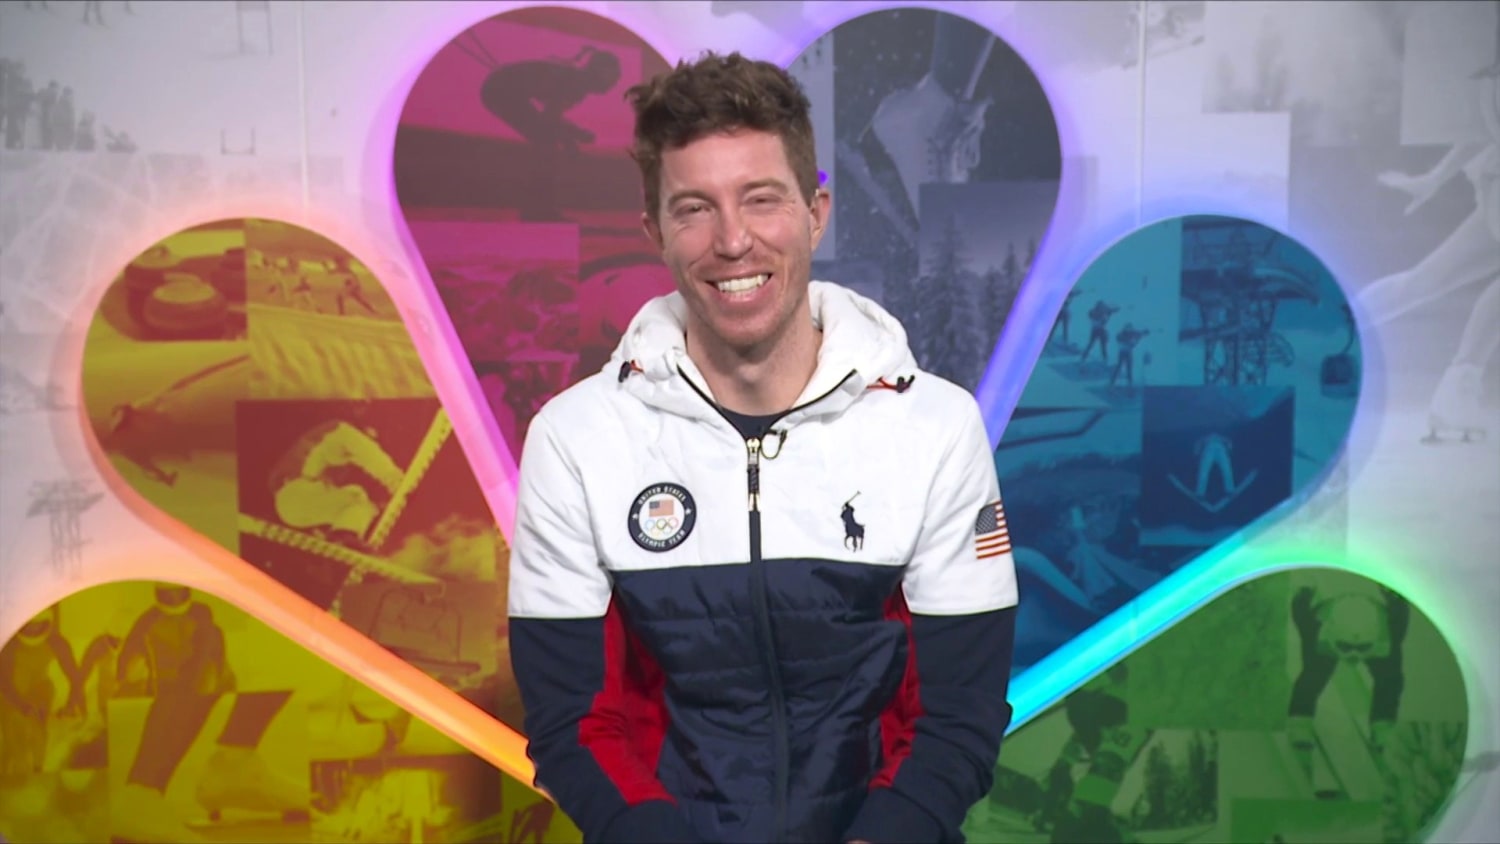 Shaun White finishes fourth in final Olympics, leaves sport in